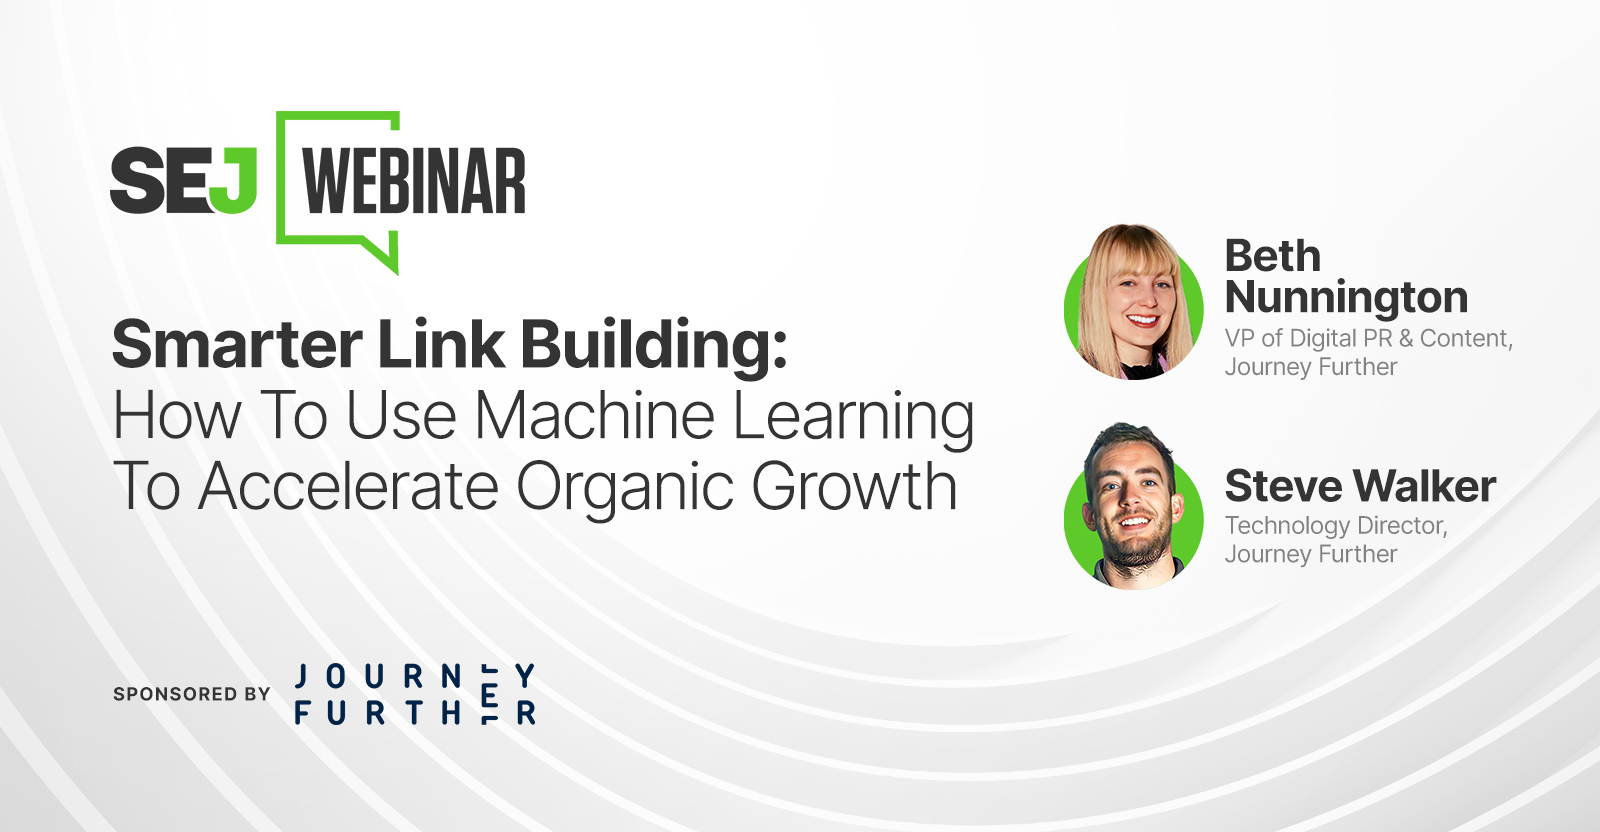 How To Work With Machine Learning [Webinar]